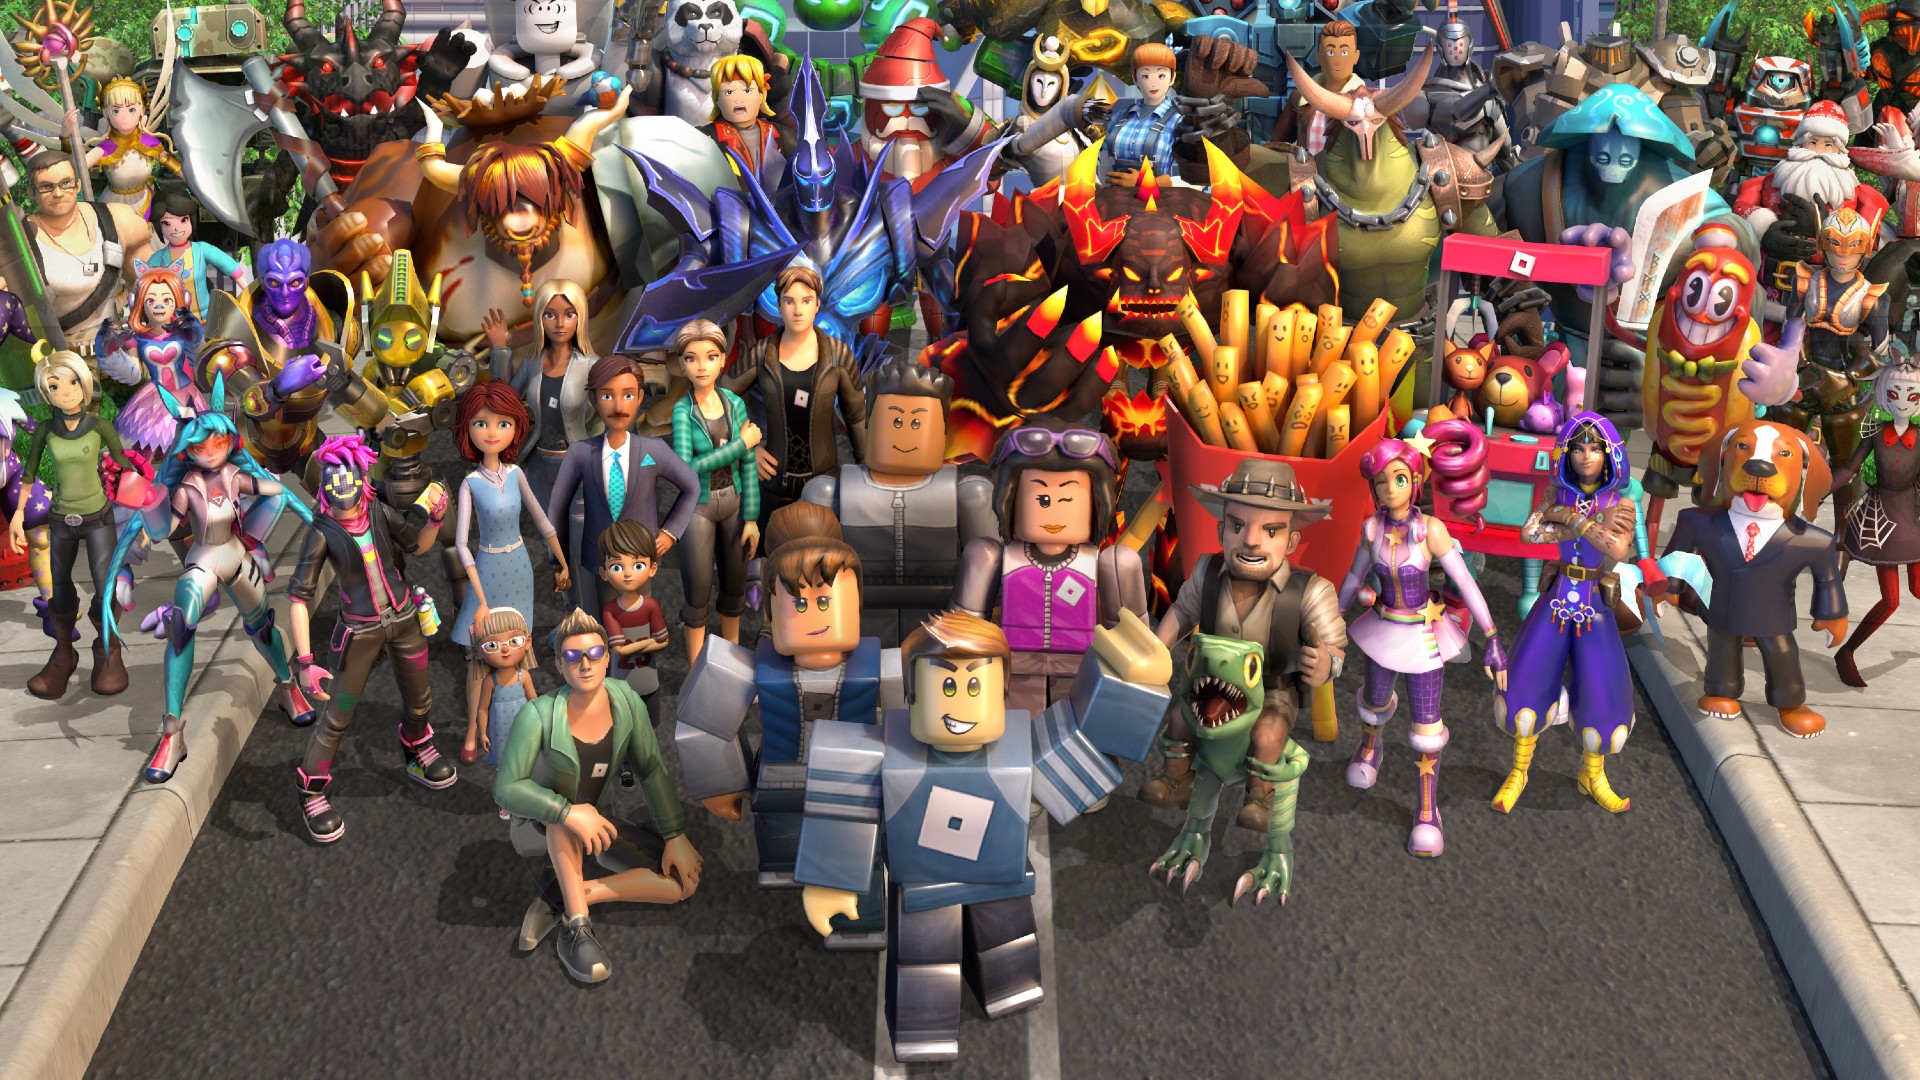 Roblox promo codes list January 2022 – how to redeem